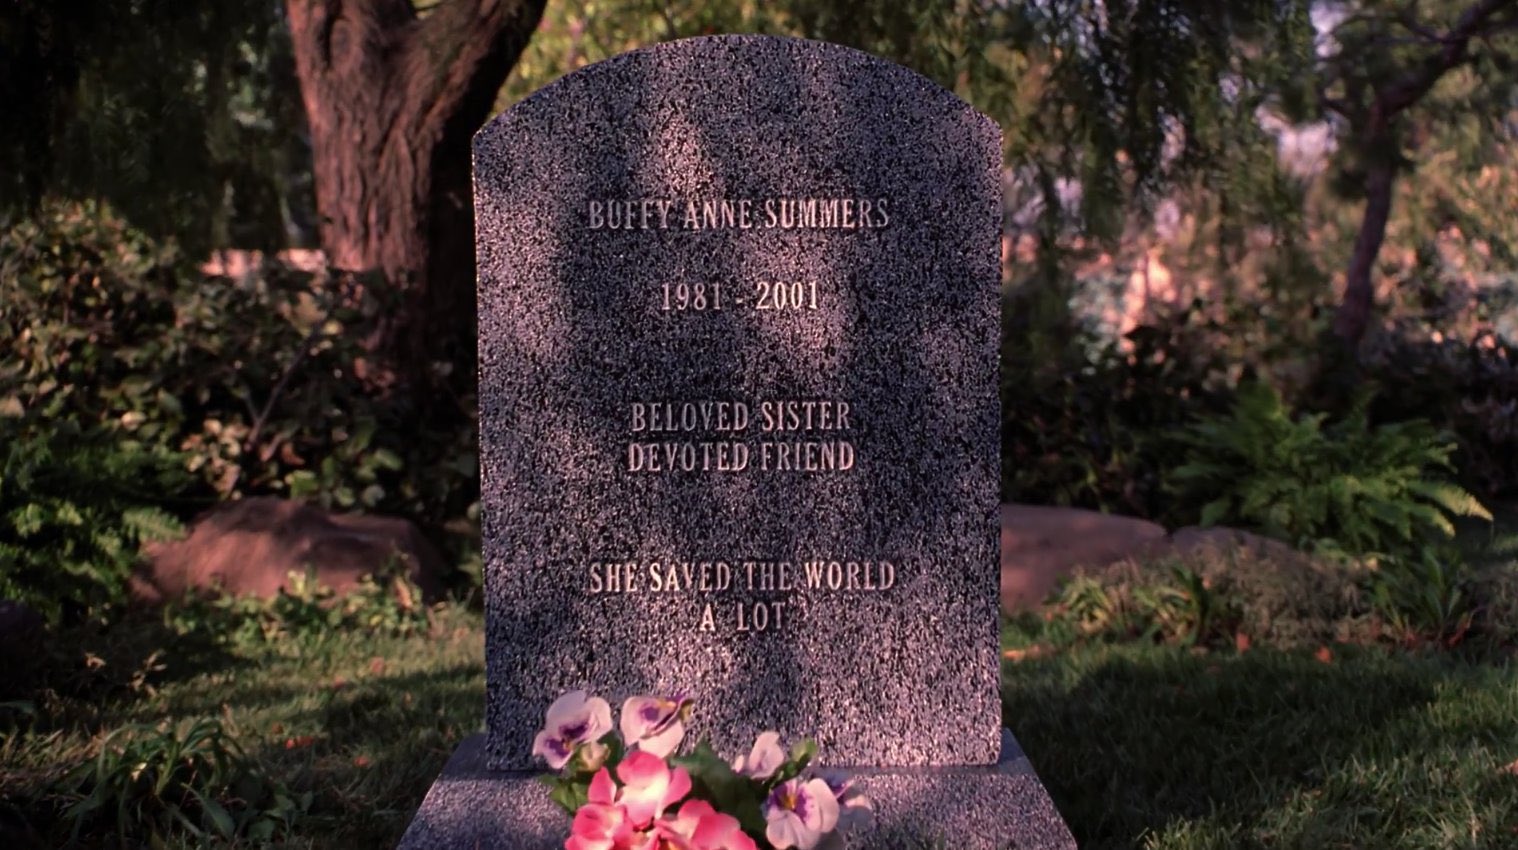 Gravestone with the epitaph, "Buffy Anne Summers, 1981-2001, beloved sister, devoted friend, she saved the world a lot."